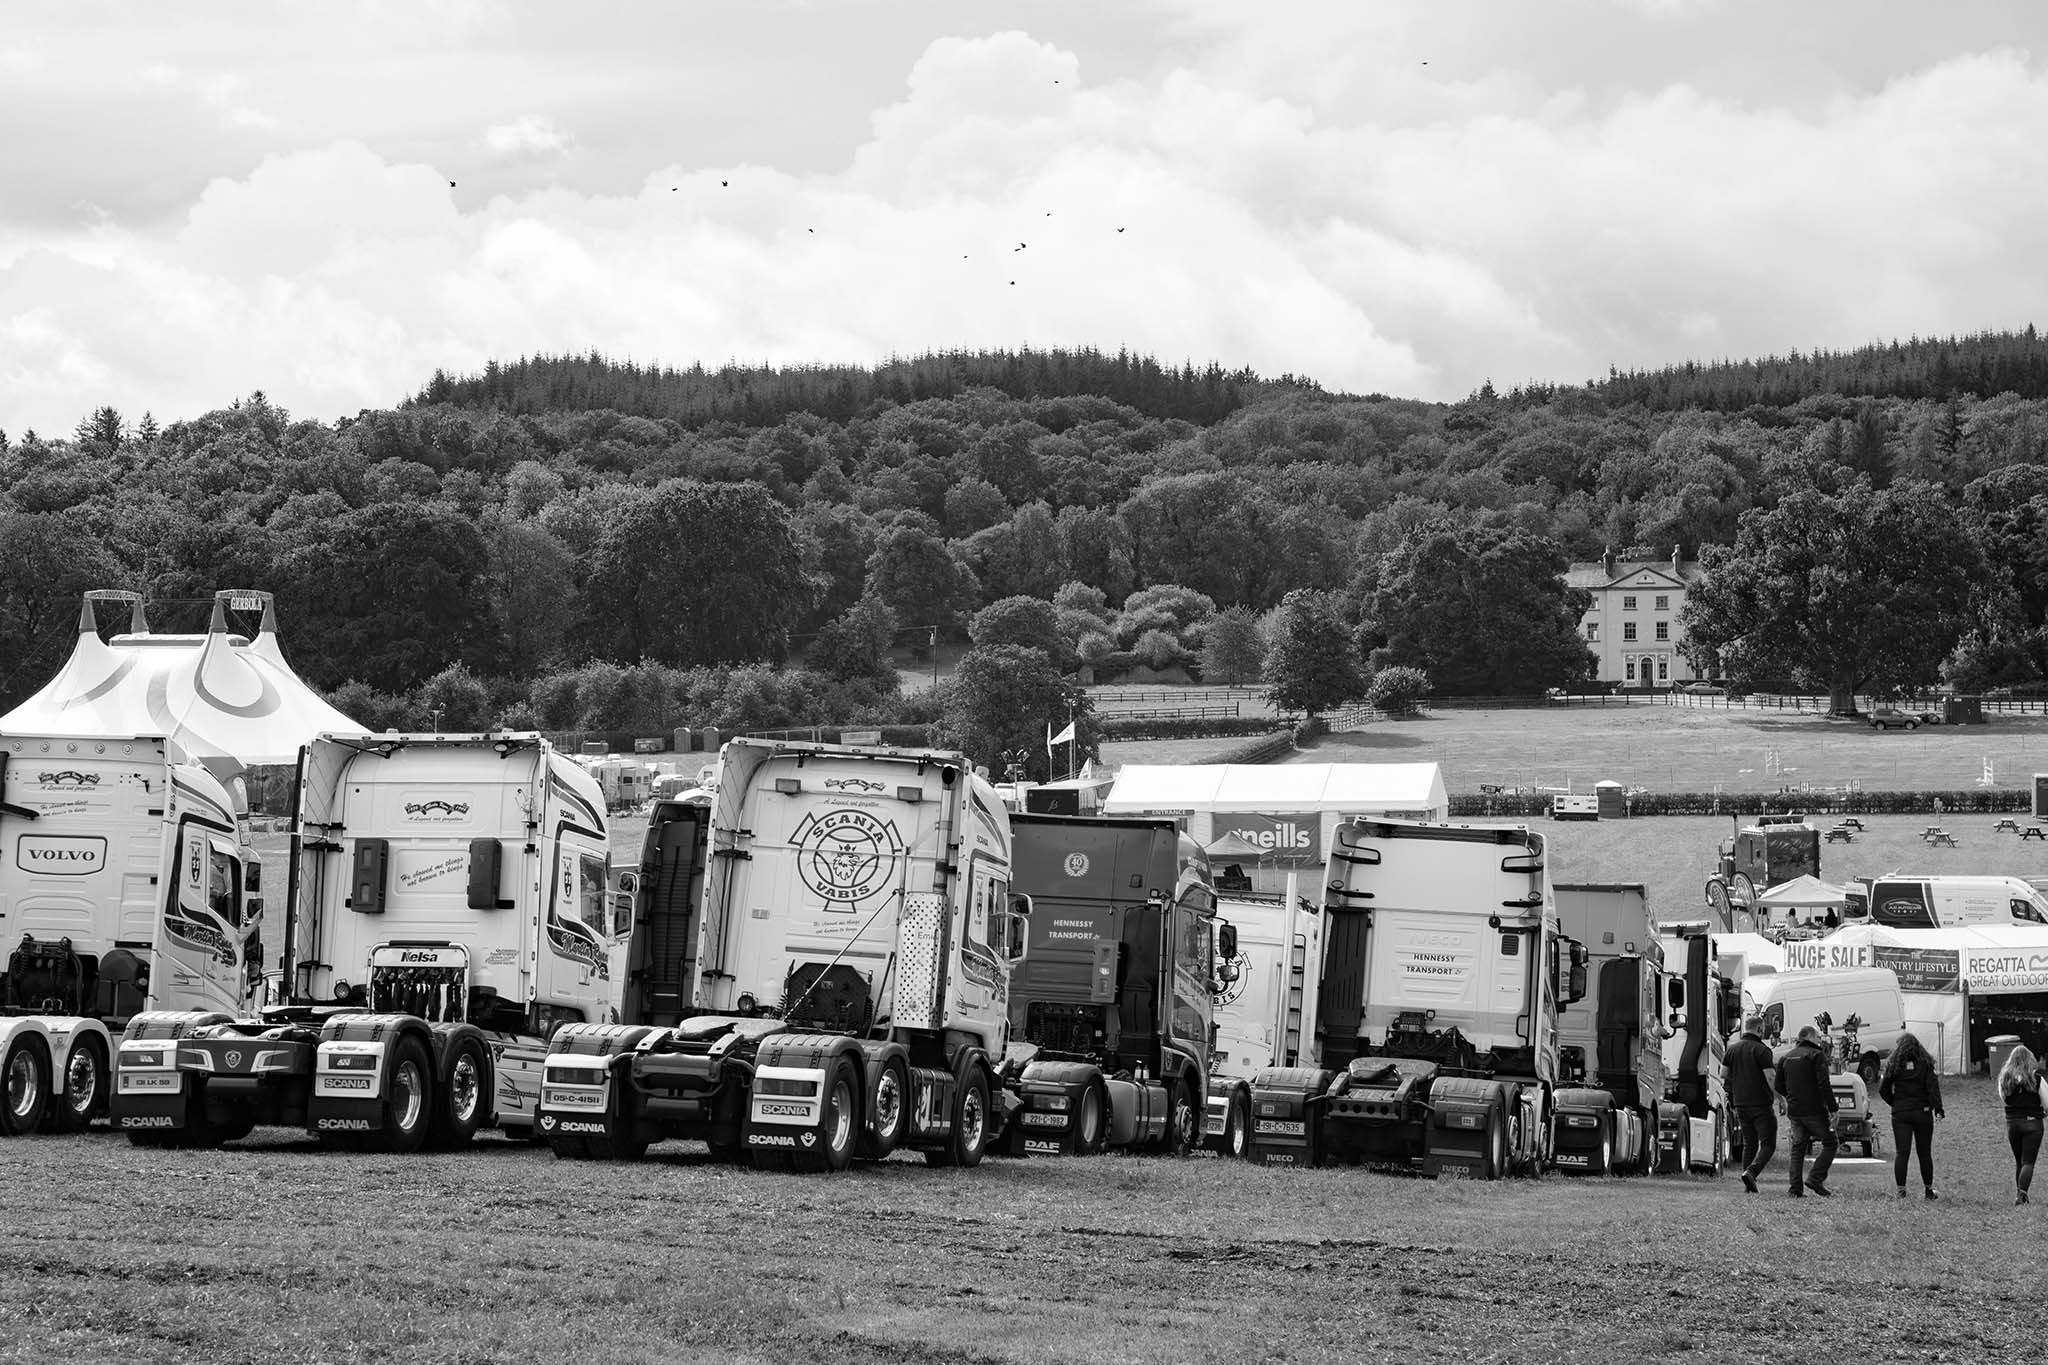 Note that Dualla Show is no longer hosting the Tipperary Truck Show which will instead take place on a separate date and on a hard-standing surface.